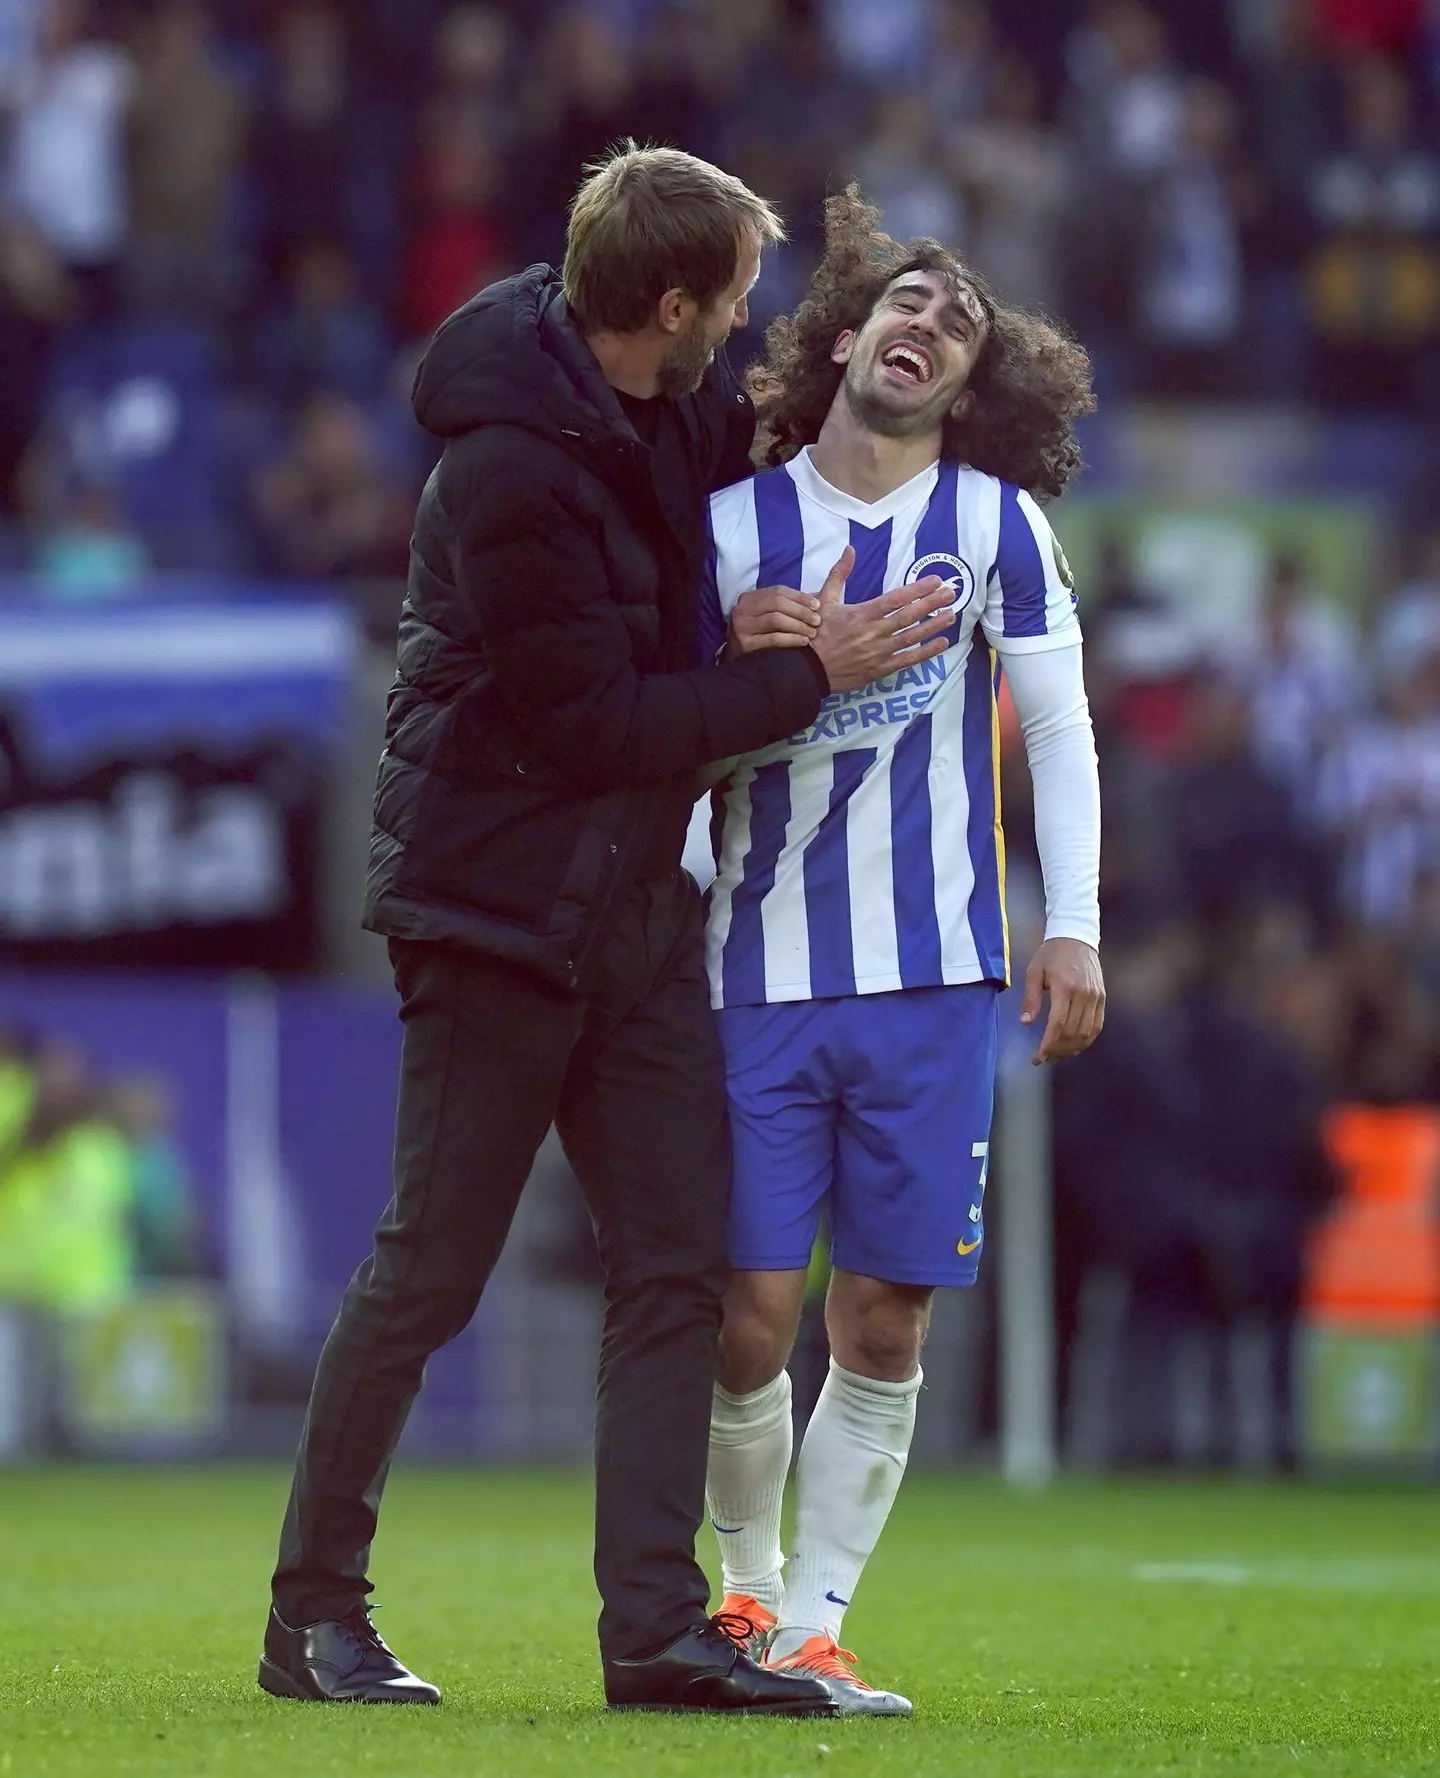 Brighton and Hove Albion manager Graham Potter celebrates with Marc Cucurella after the fans after the Premier League match at the AMEX Stadium, Brighton. (Alamy)